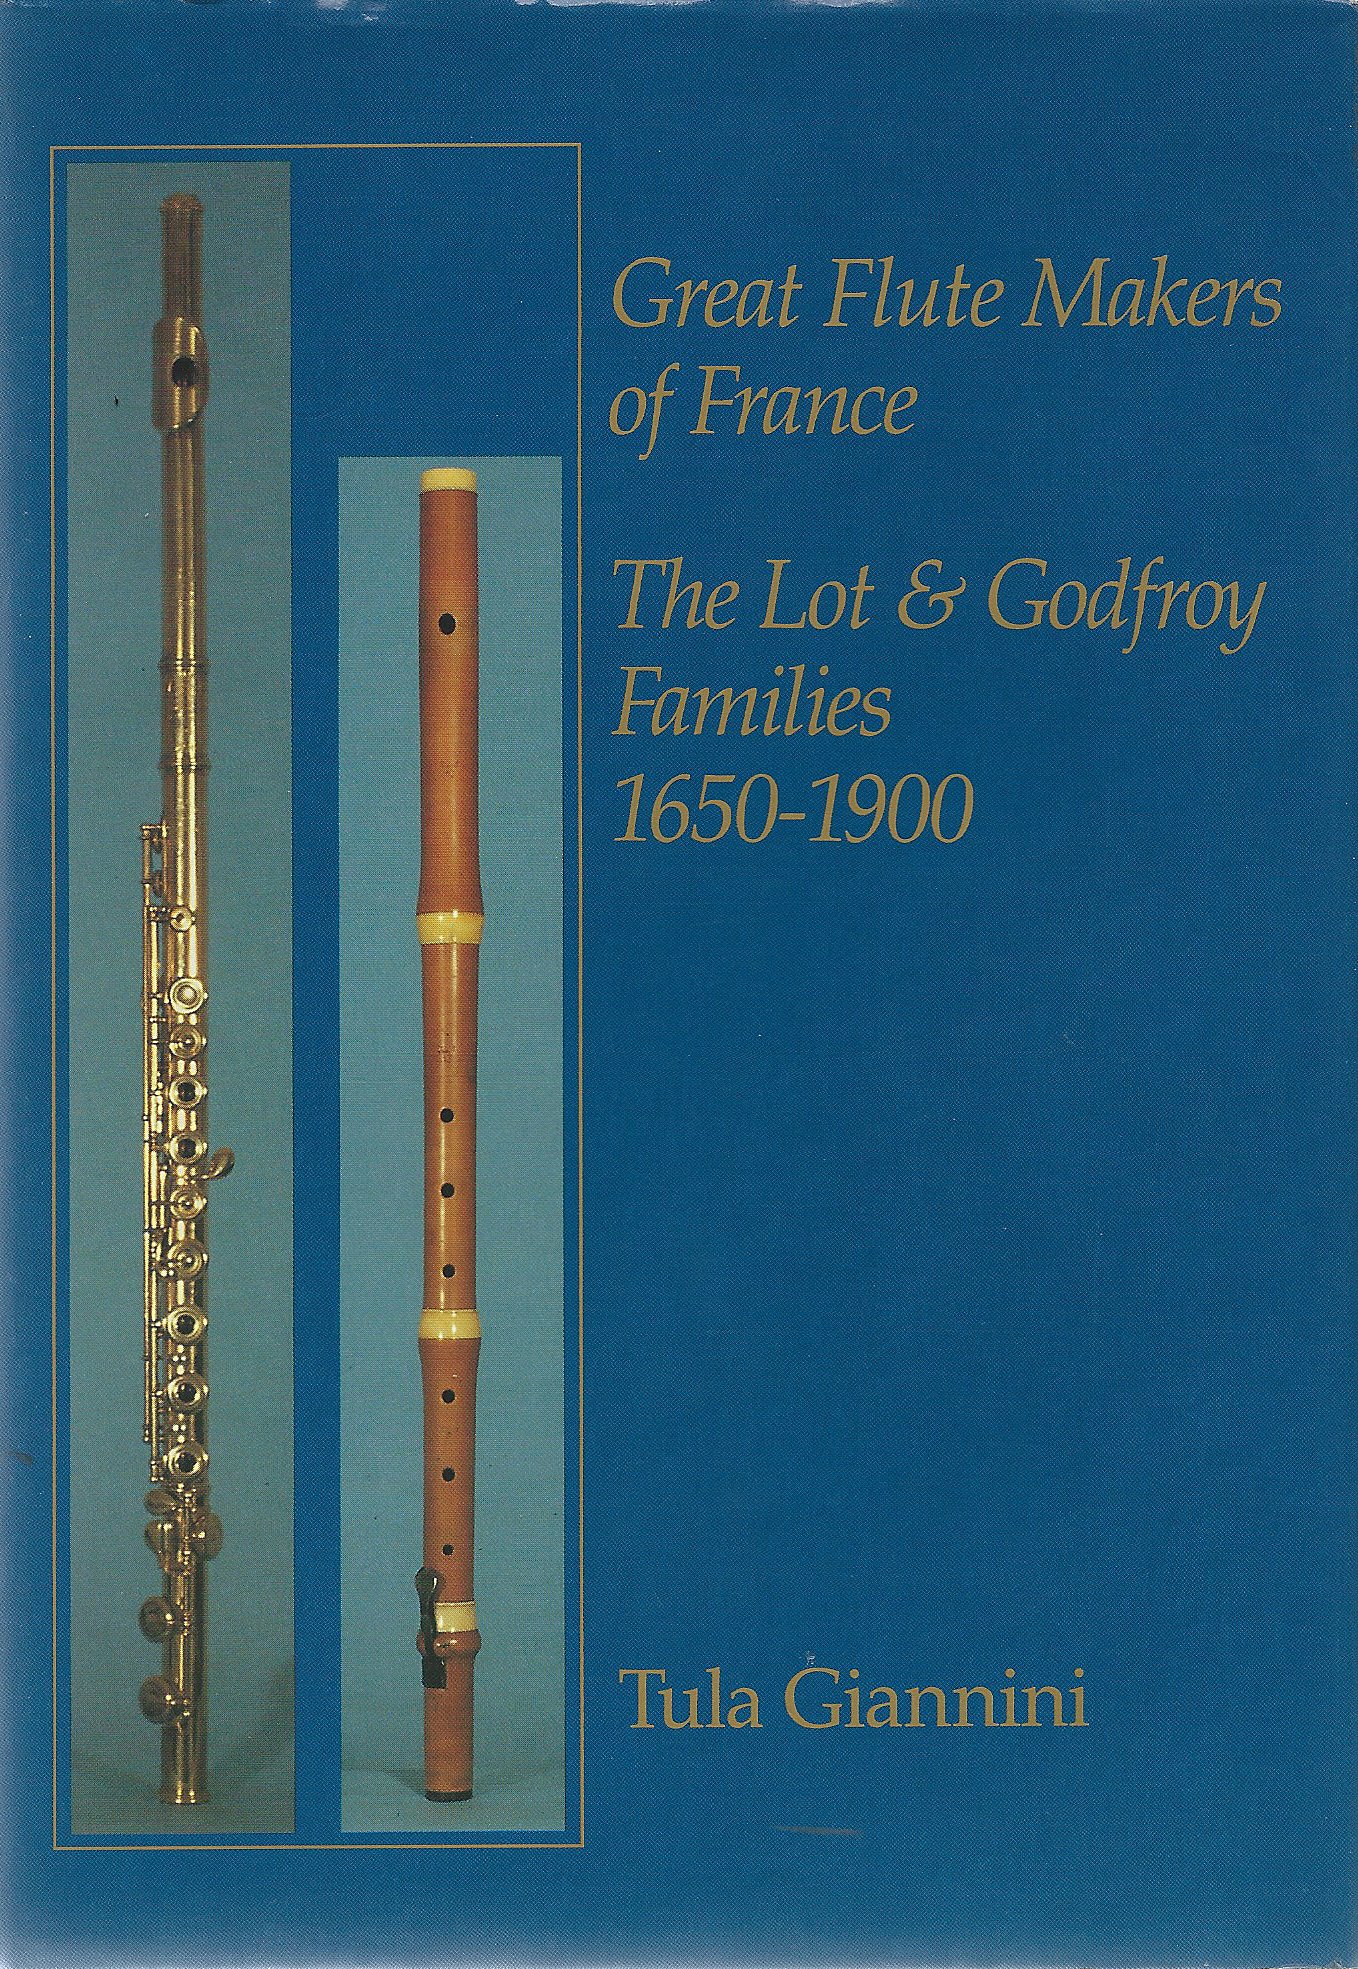 New-book-Great-Flute-Makers-of-France-Tula-Giannini1